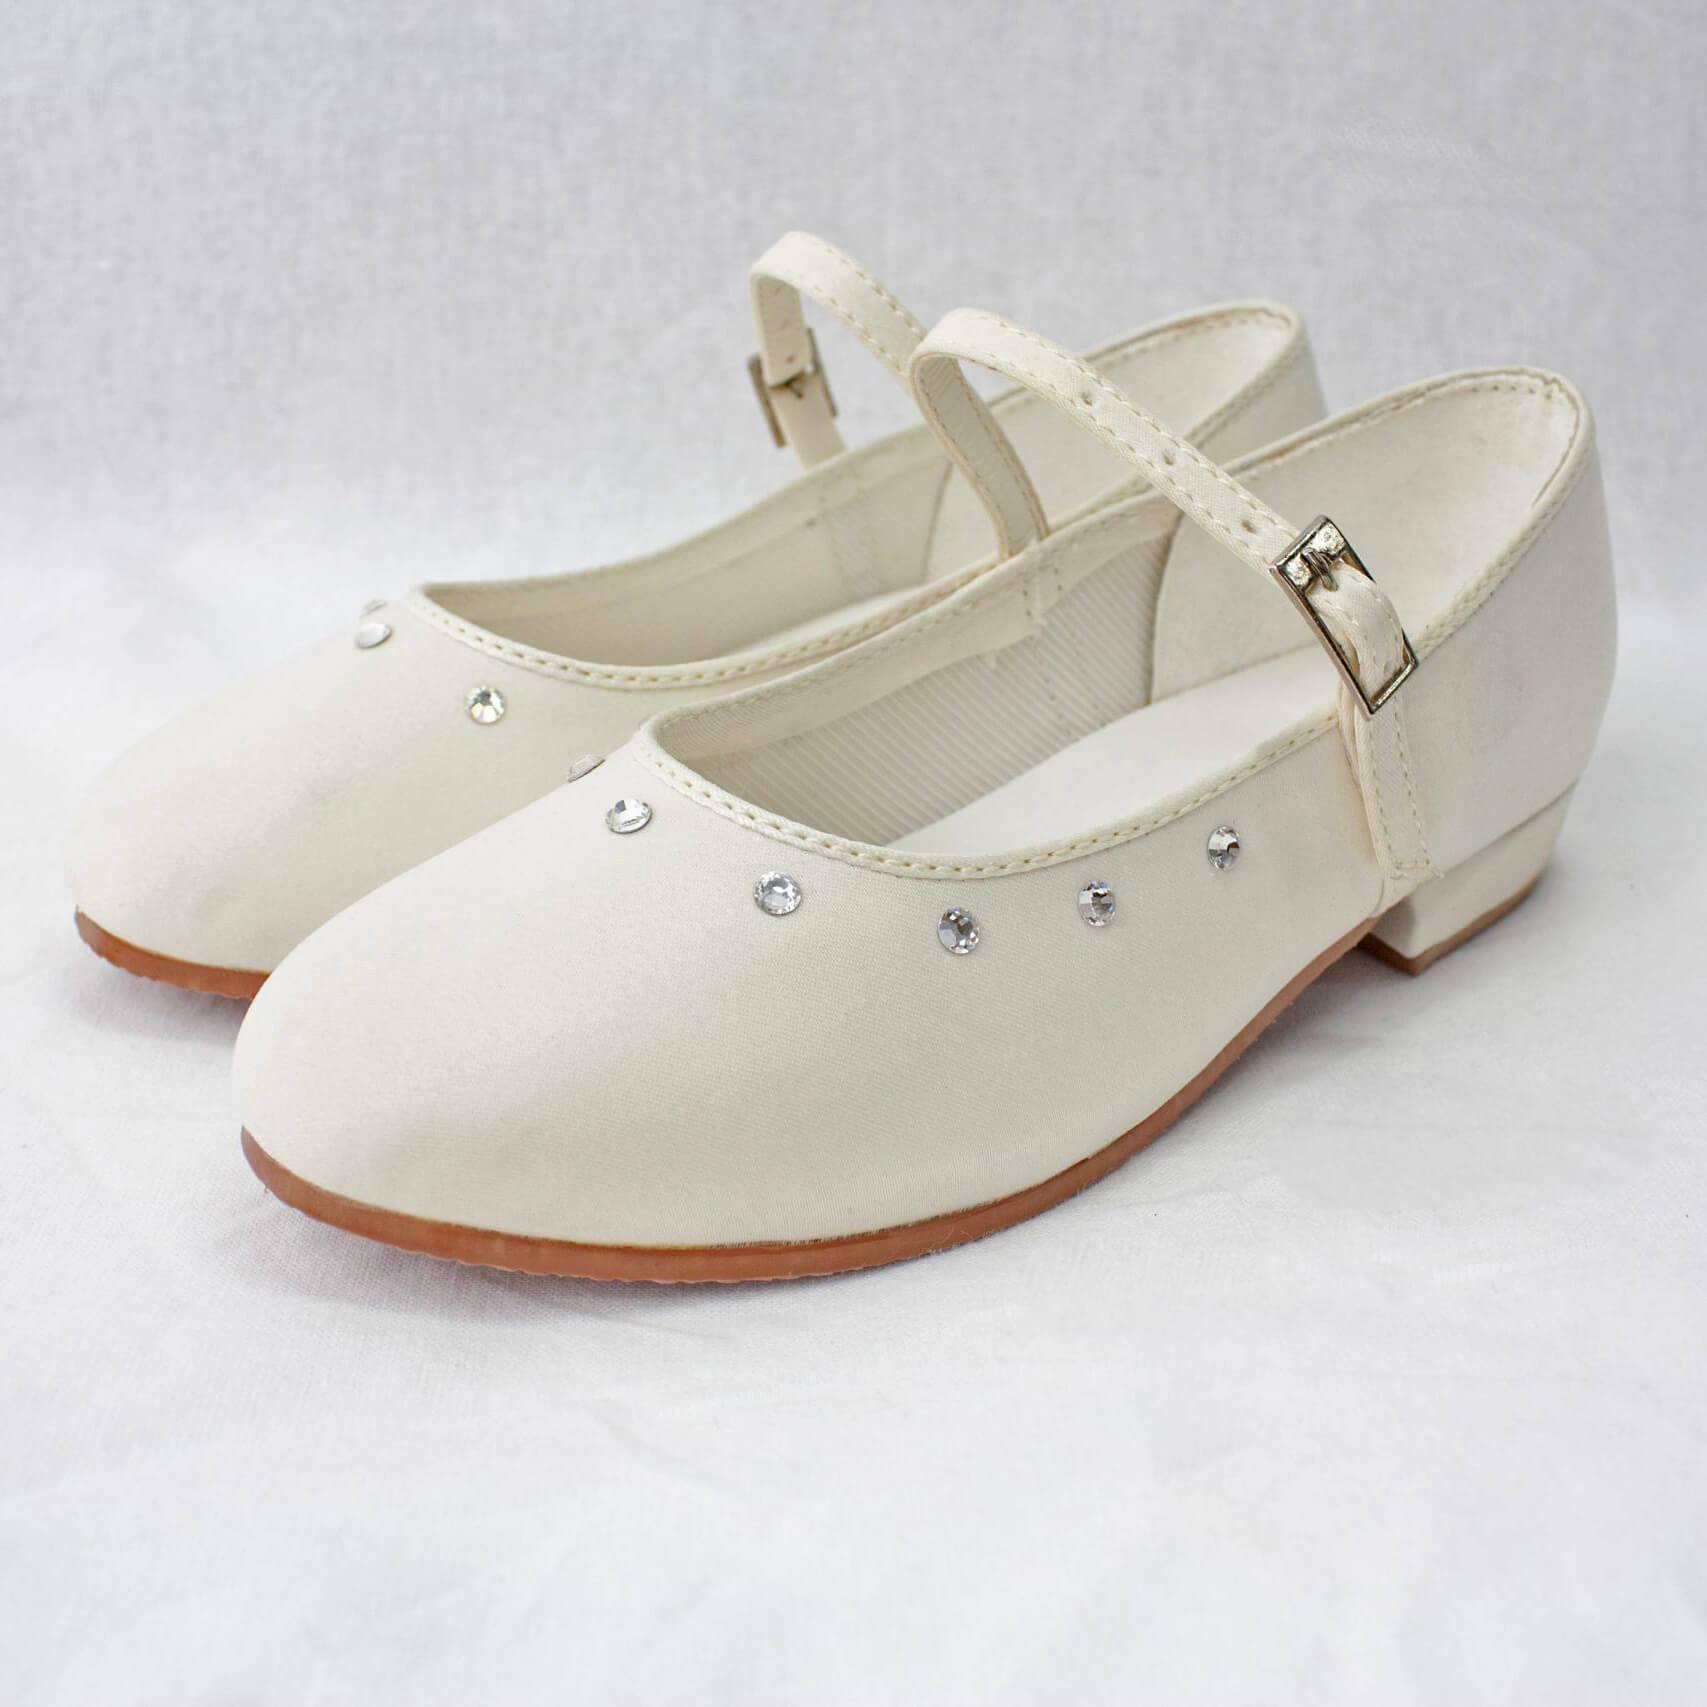 Girls white satin party shoes